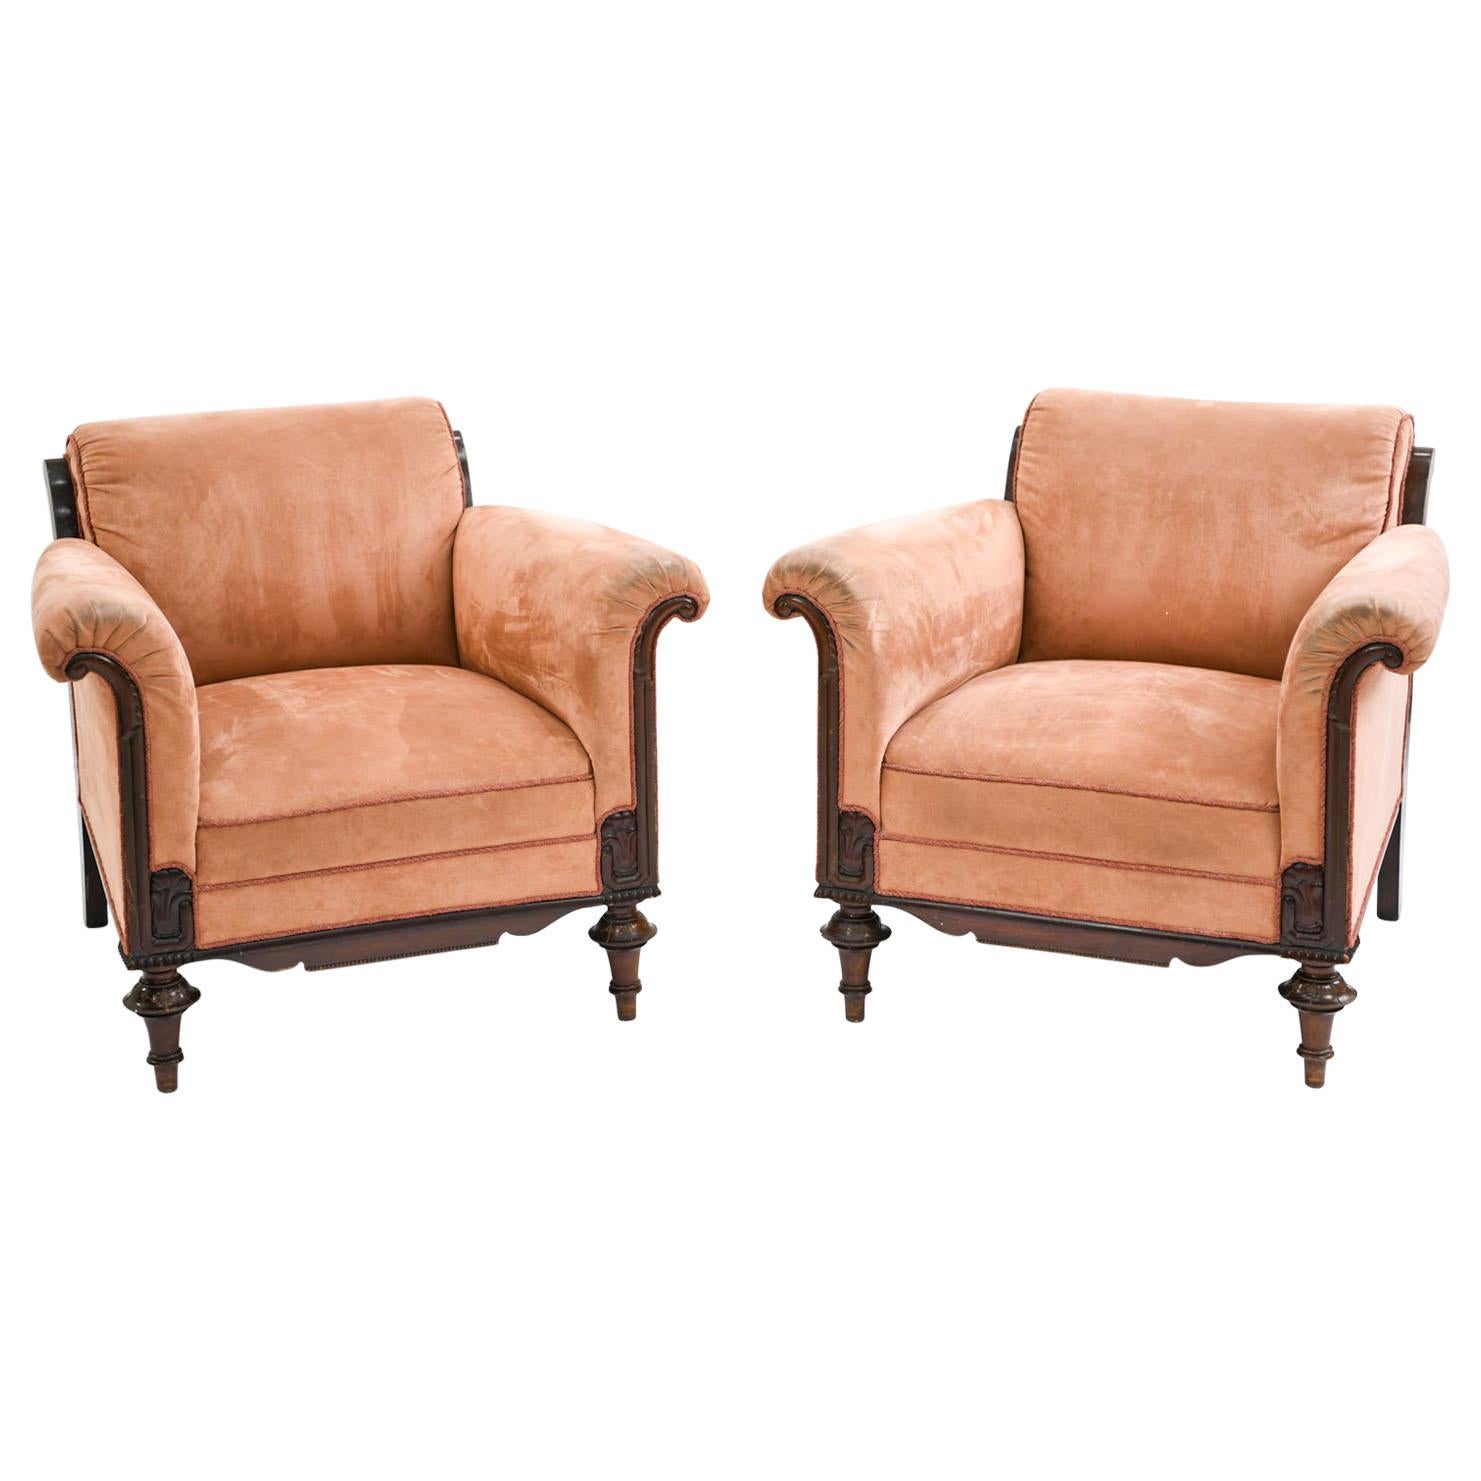 Pair of C.B. Hansen Lounge Chairs Attributed to Johan Rohde